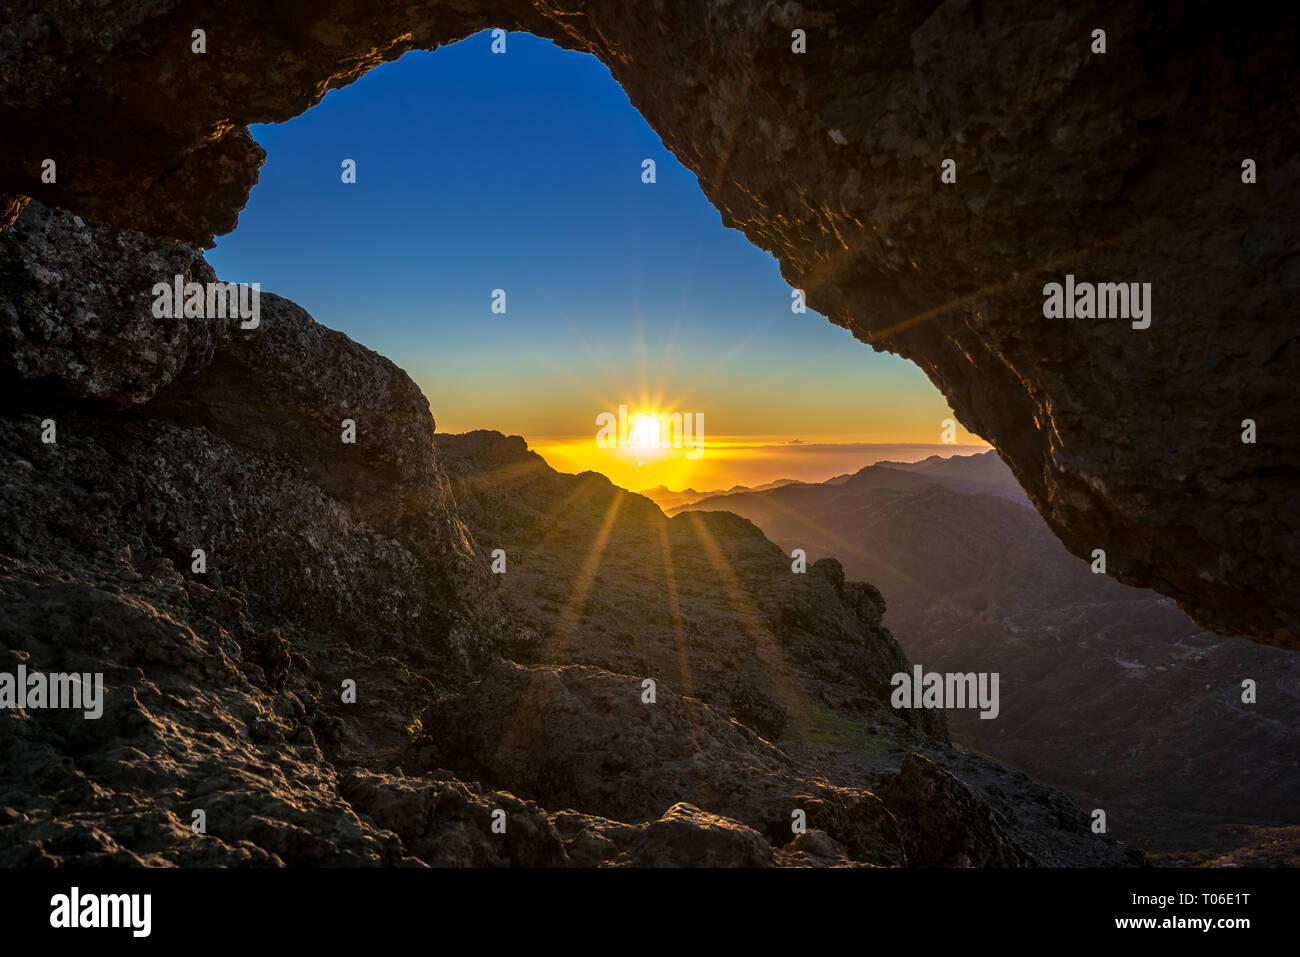 Sunset and mountain landscape view from eroded stone arch know as Ventana del nublo or La Agujereada. One of the higest places in Gran Canaria Island. Stock Photo